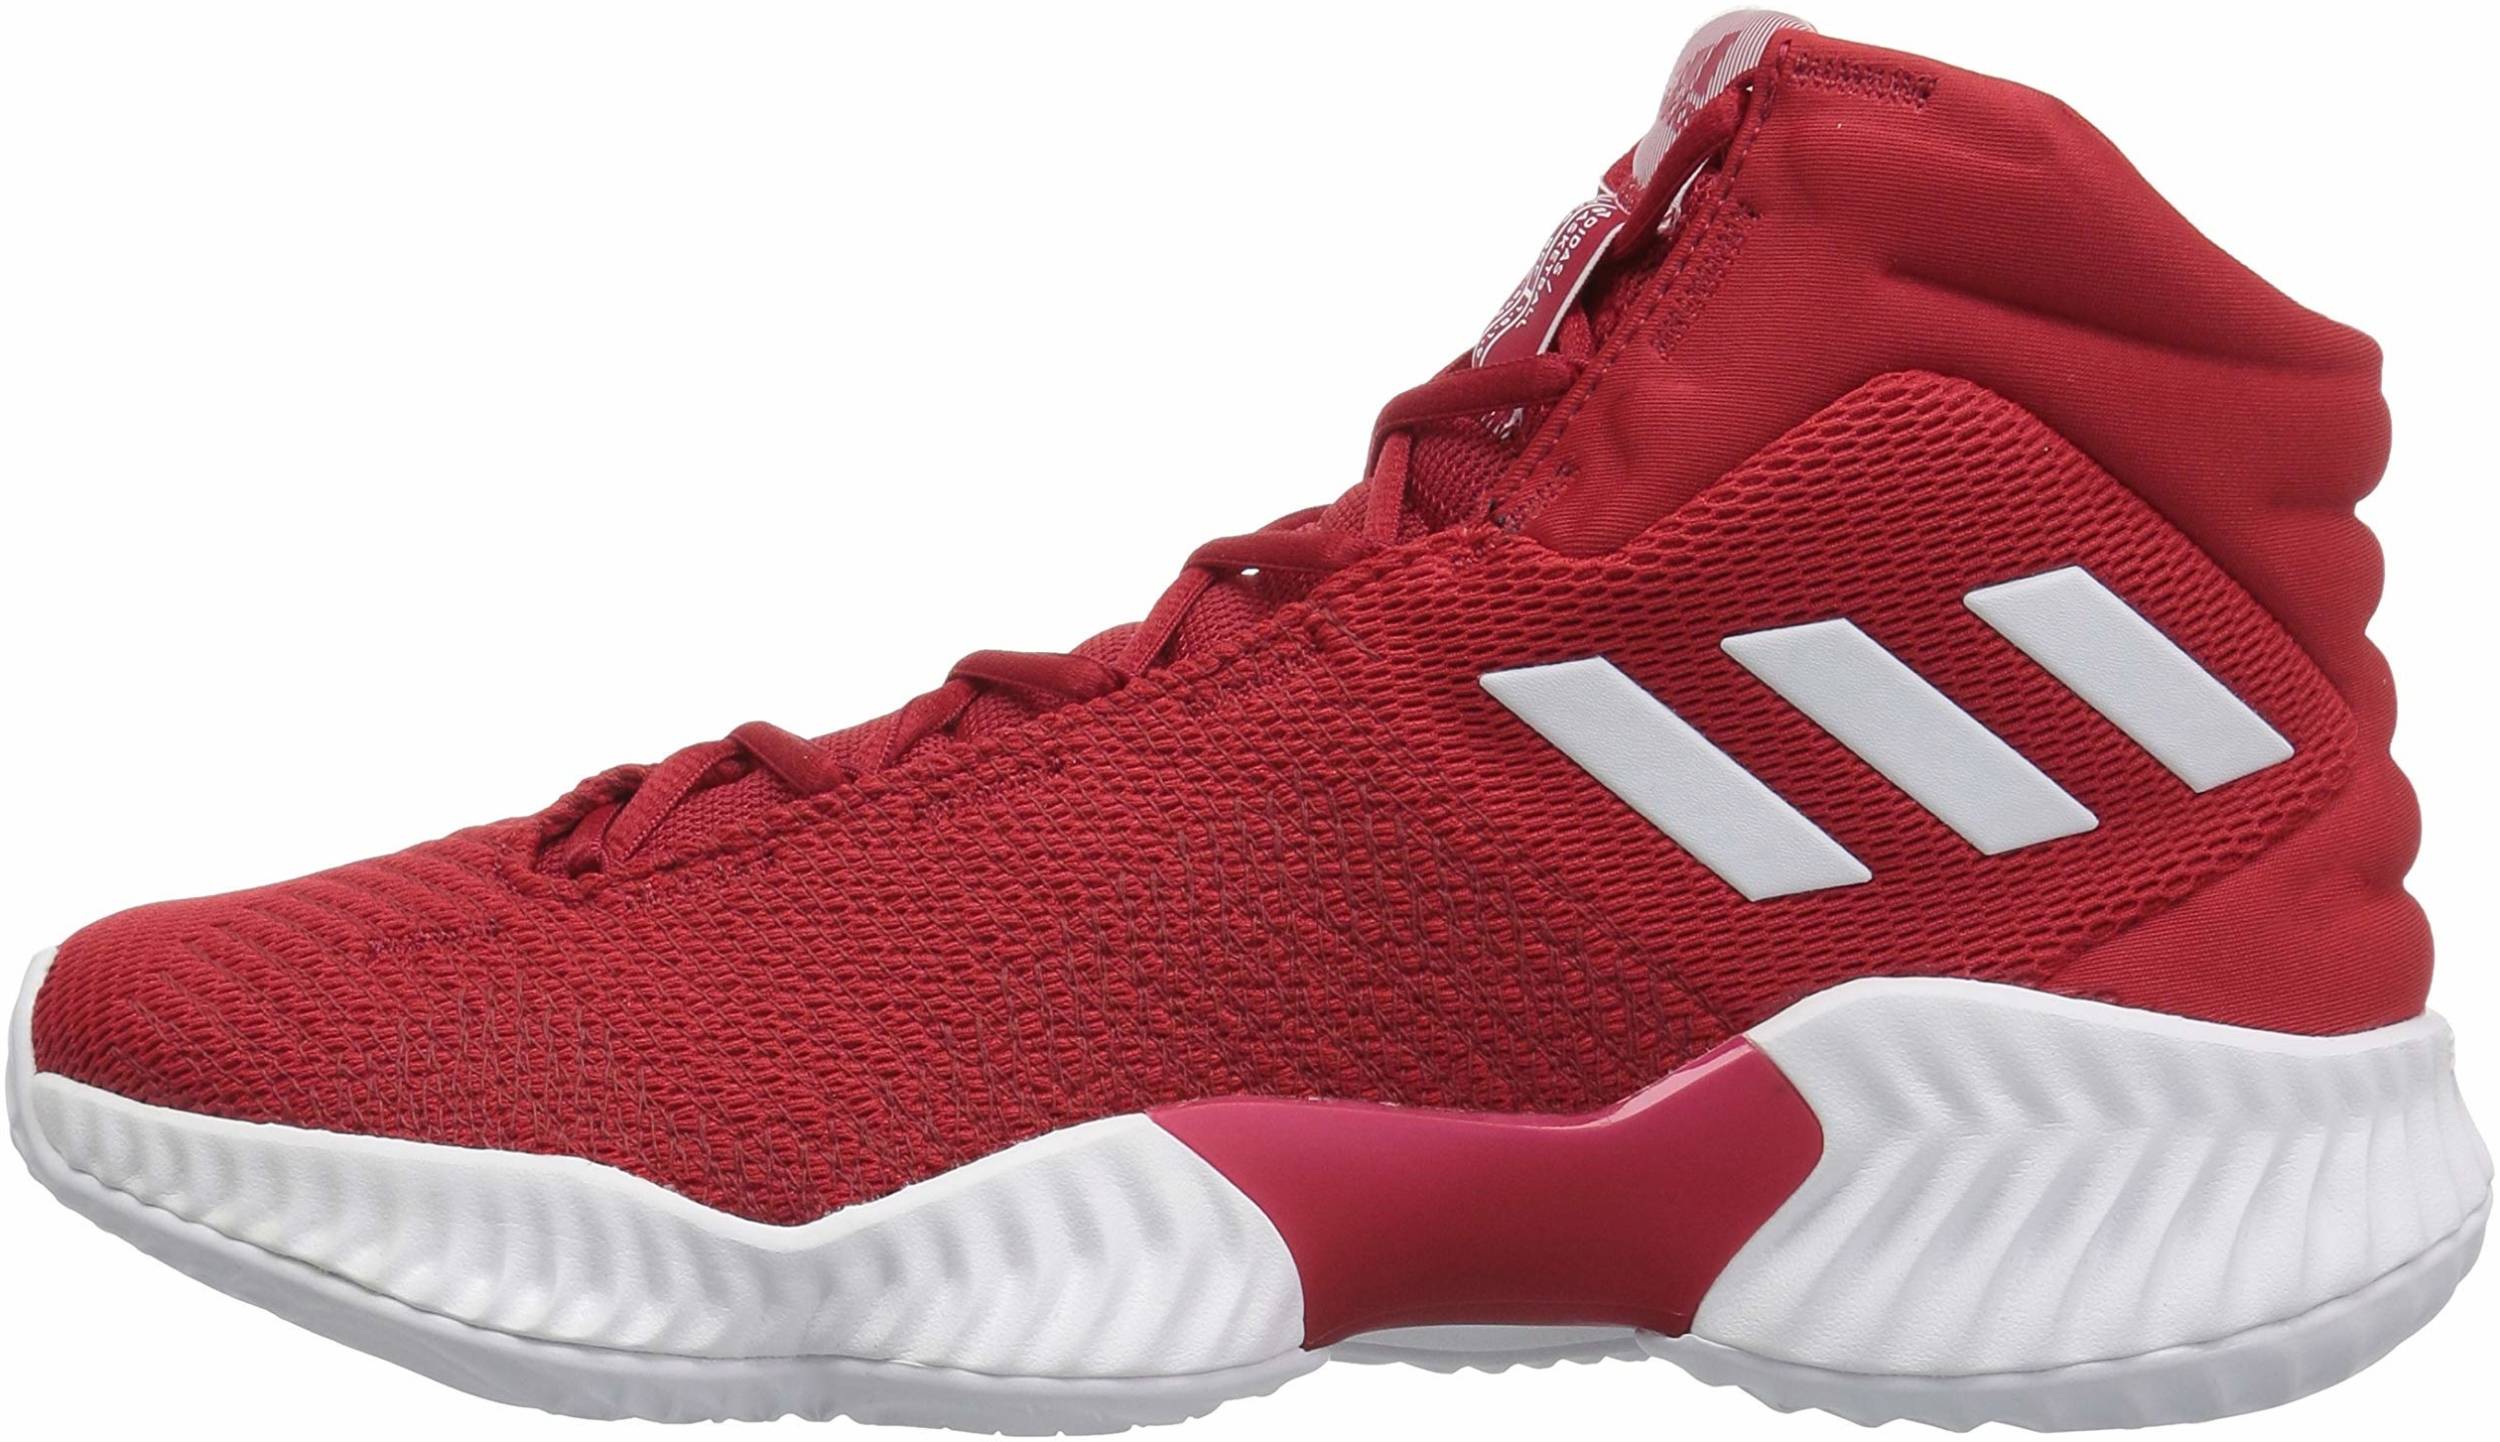 Adidas Pro Bounce 2018 - Deals ($43), Facts, Reviews (2021 ...